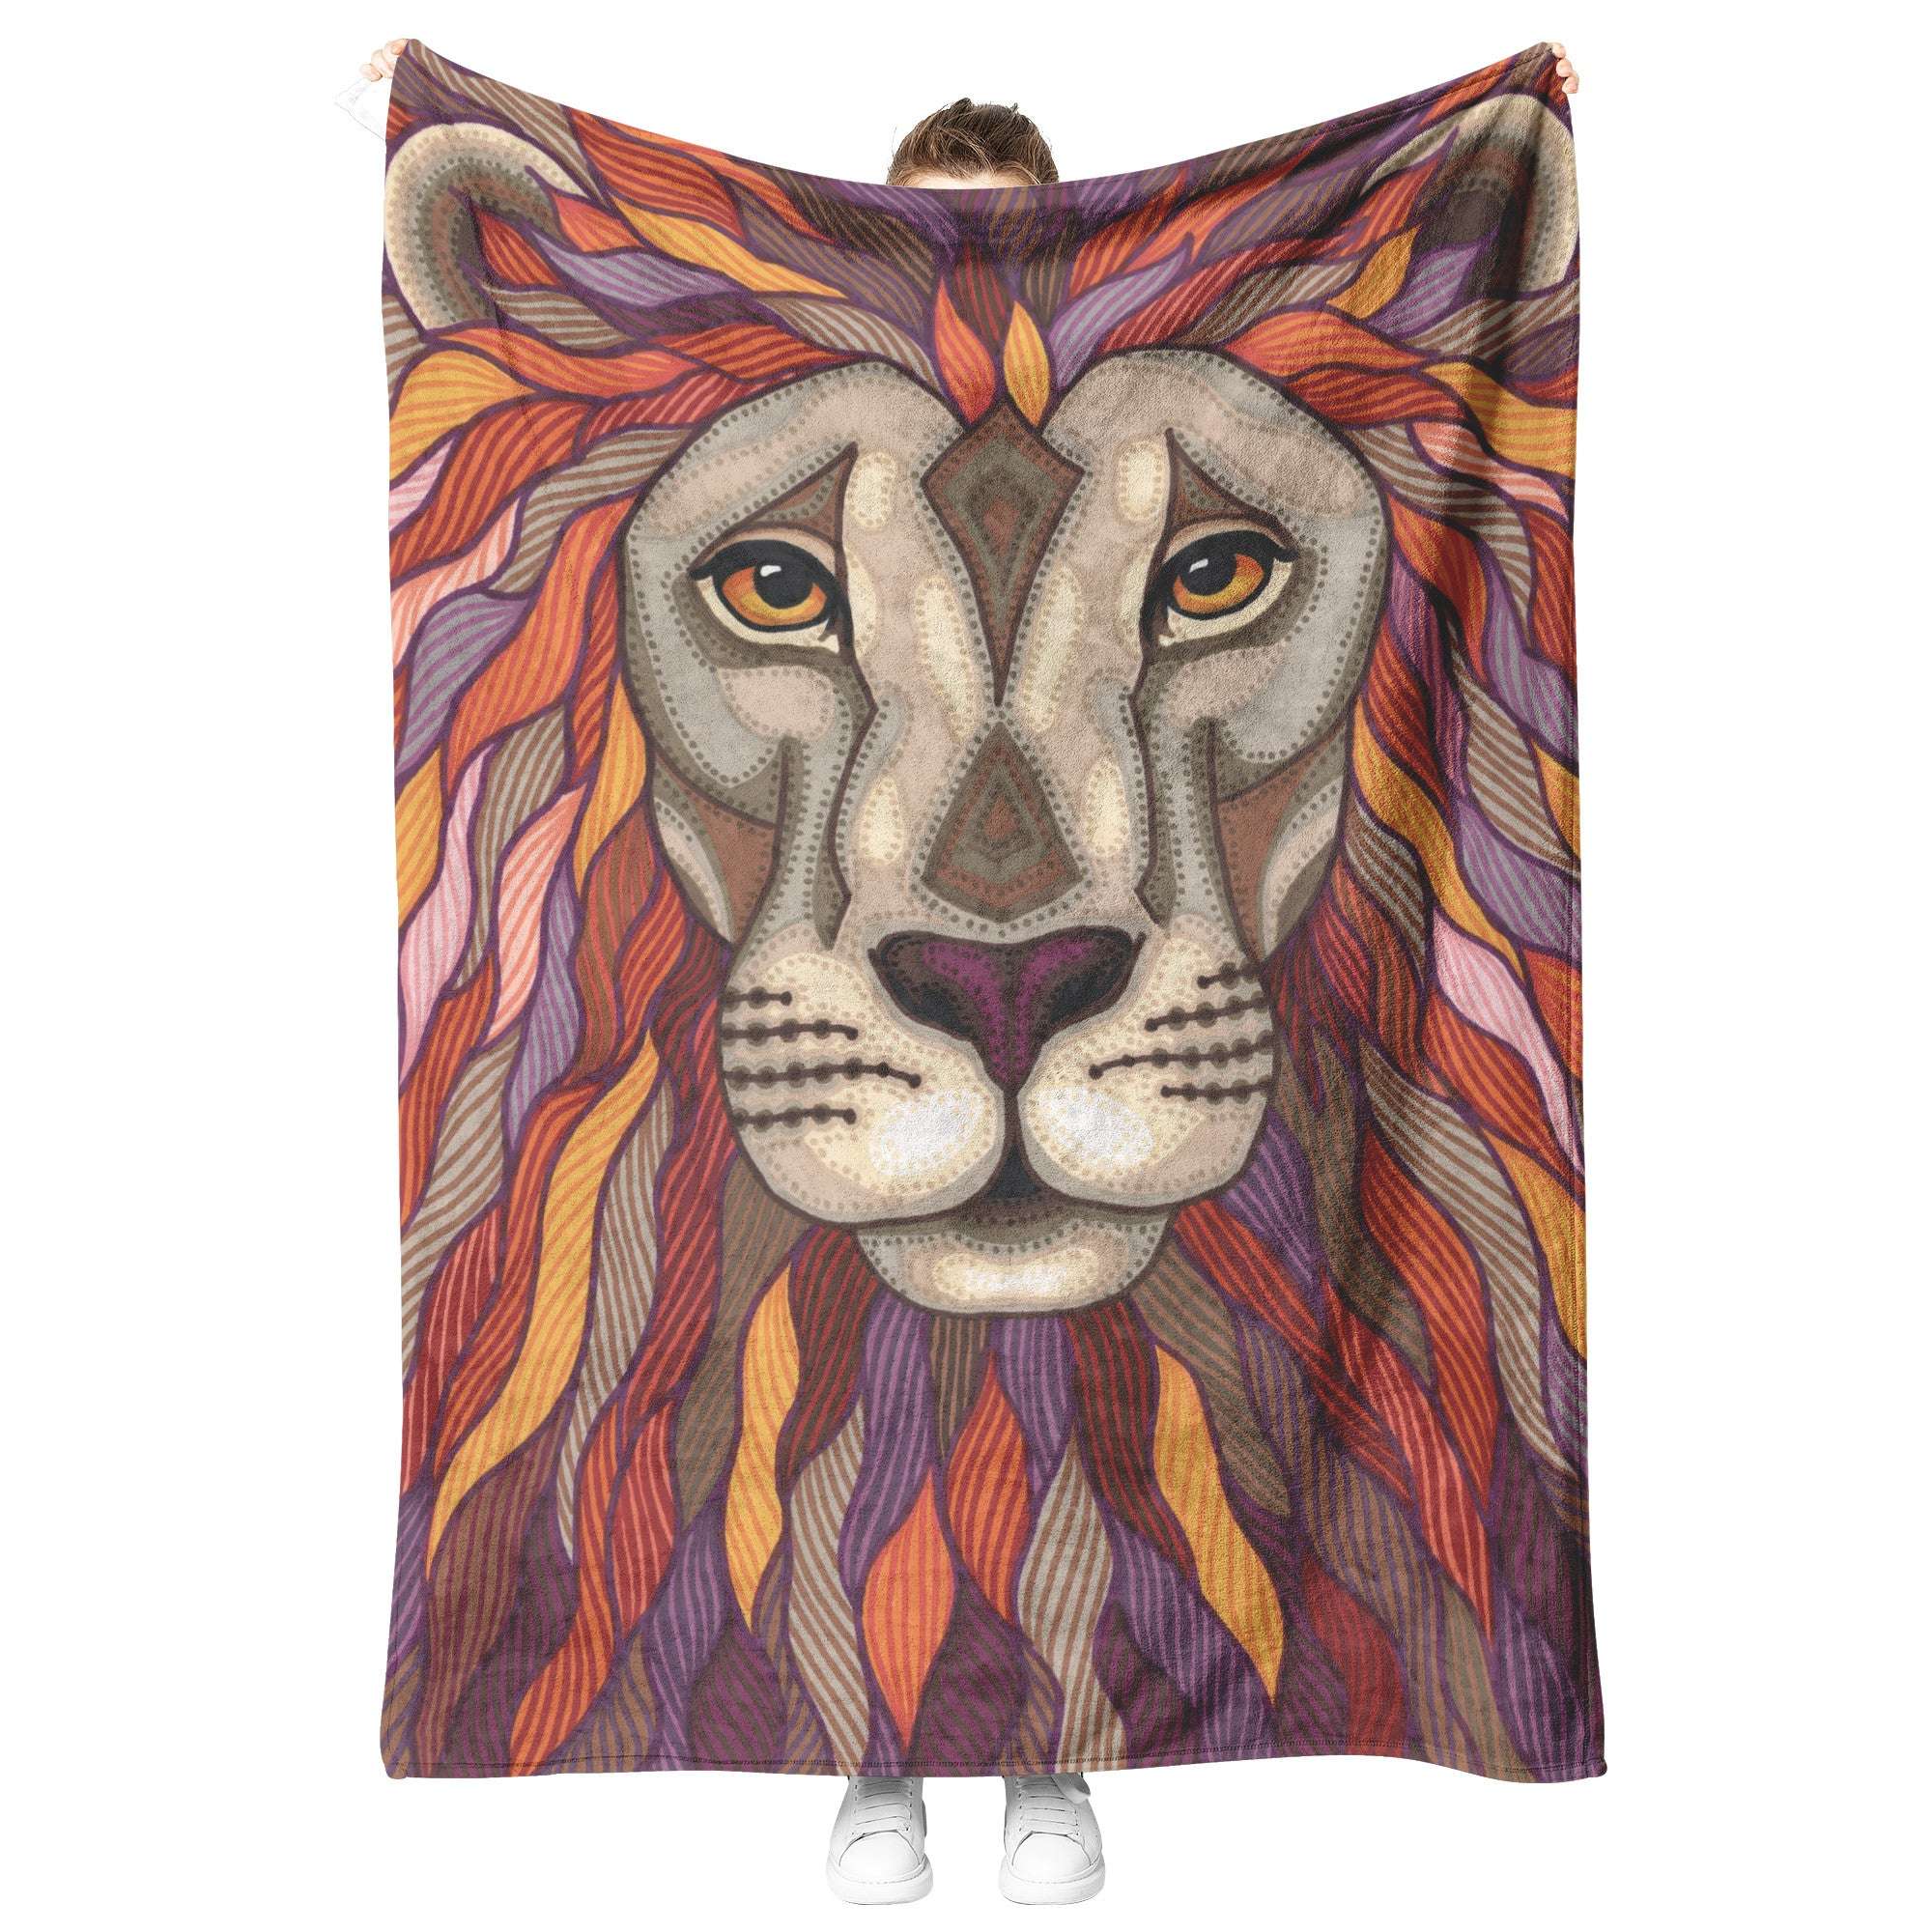 A person standing behind a Lion Pride Blanket featuring a detailed illustration of a lion's face with geometric and organic patterns.